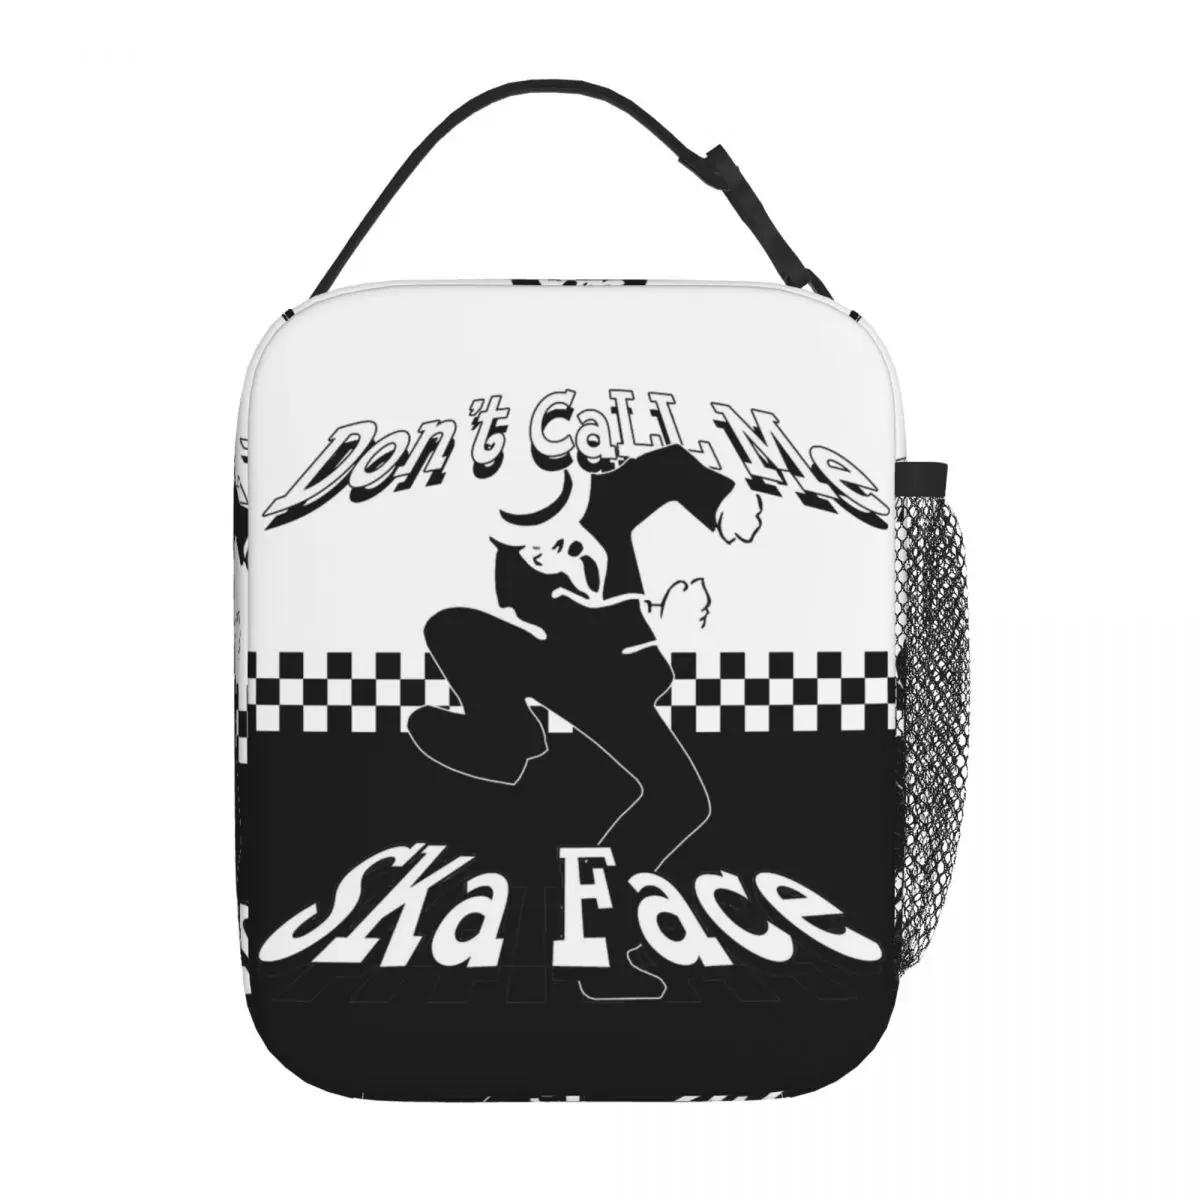 

Punk Rock Jamaican Ska Reggae Music Lunch Bag for Picnic Rocksteady Two-tone Food Bag Men Women Cooler Thermal Lunch Boxes